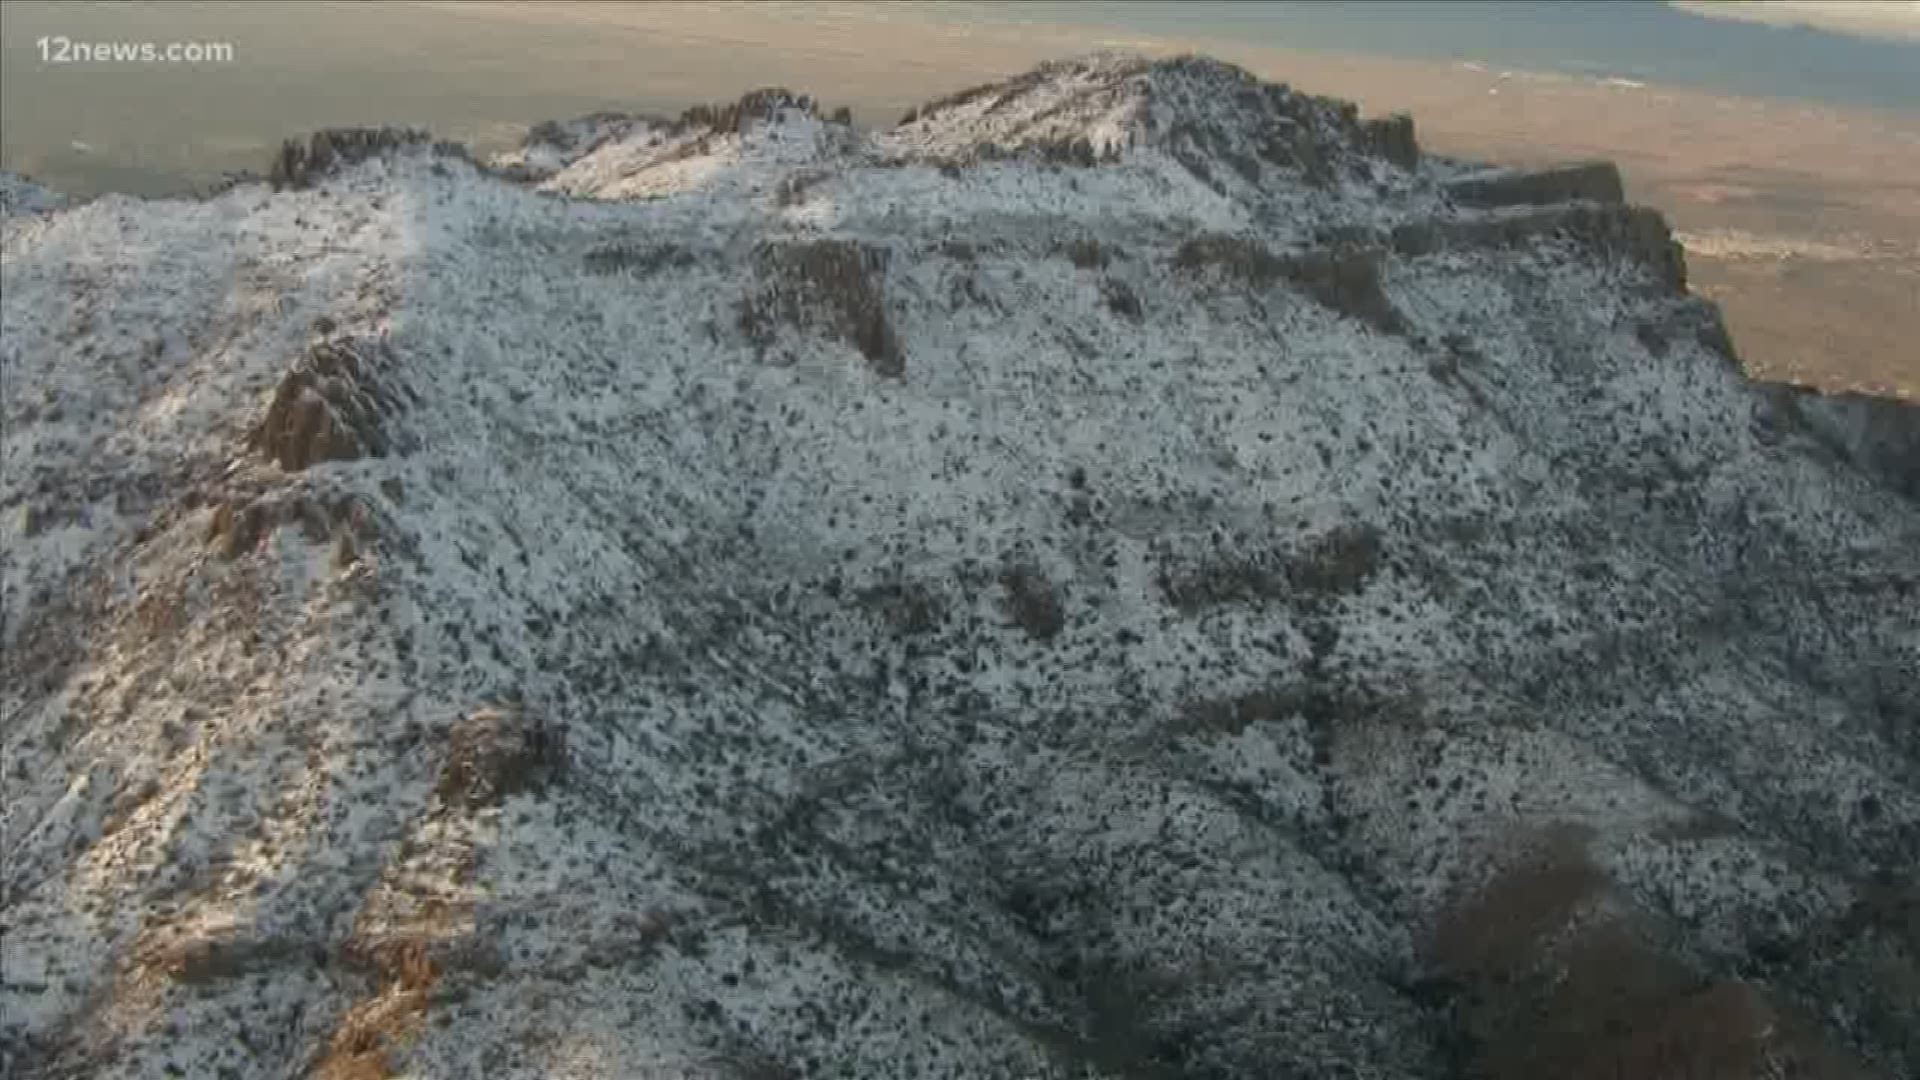 Southern Arizona woke up to several inches of snow. Some are loving it and others are looking forward to it warming up.